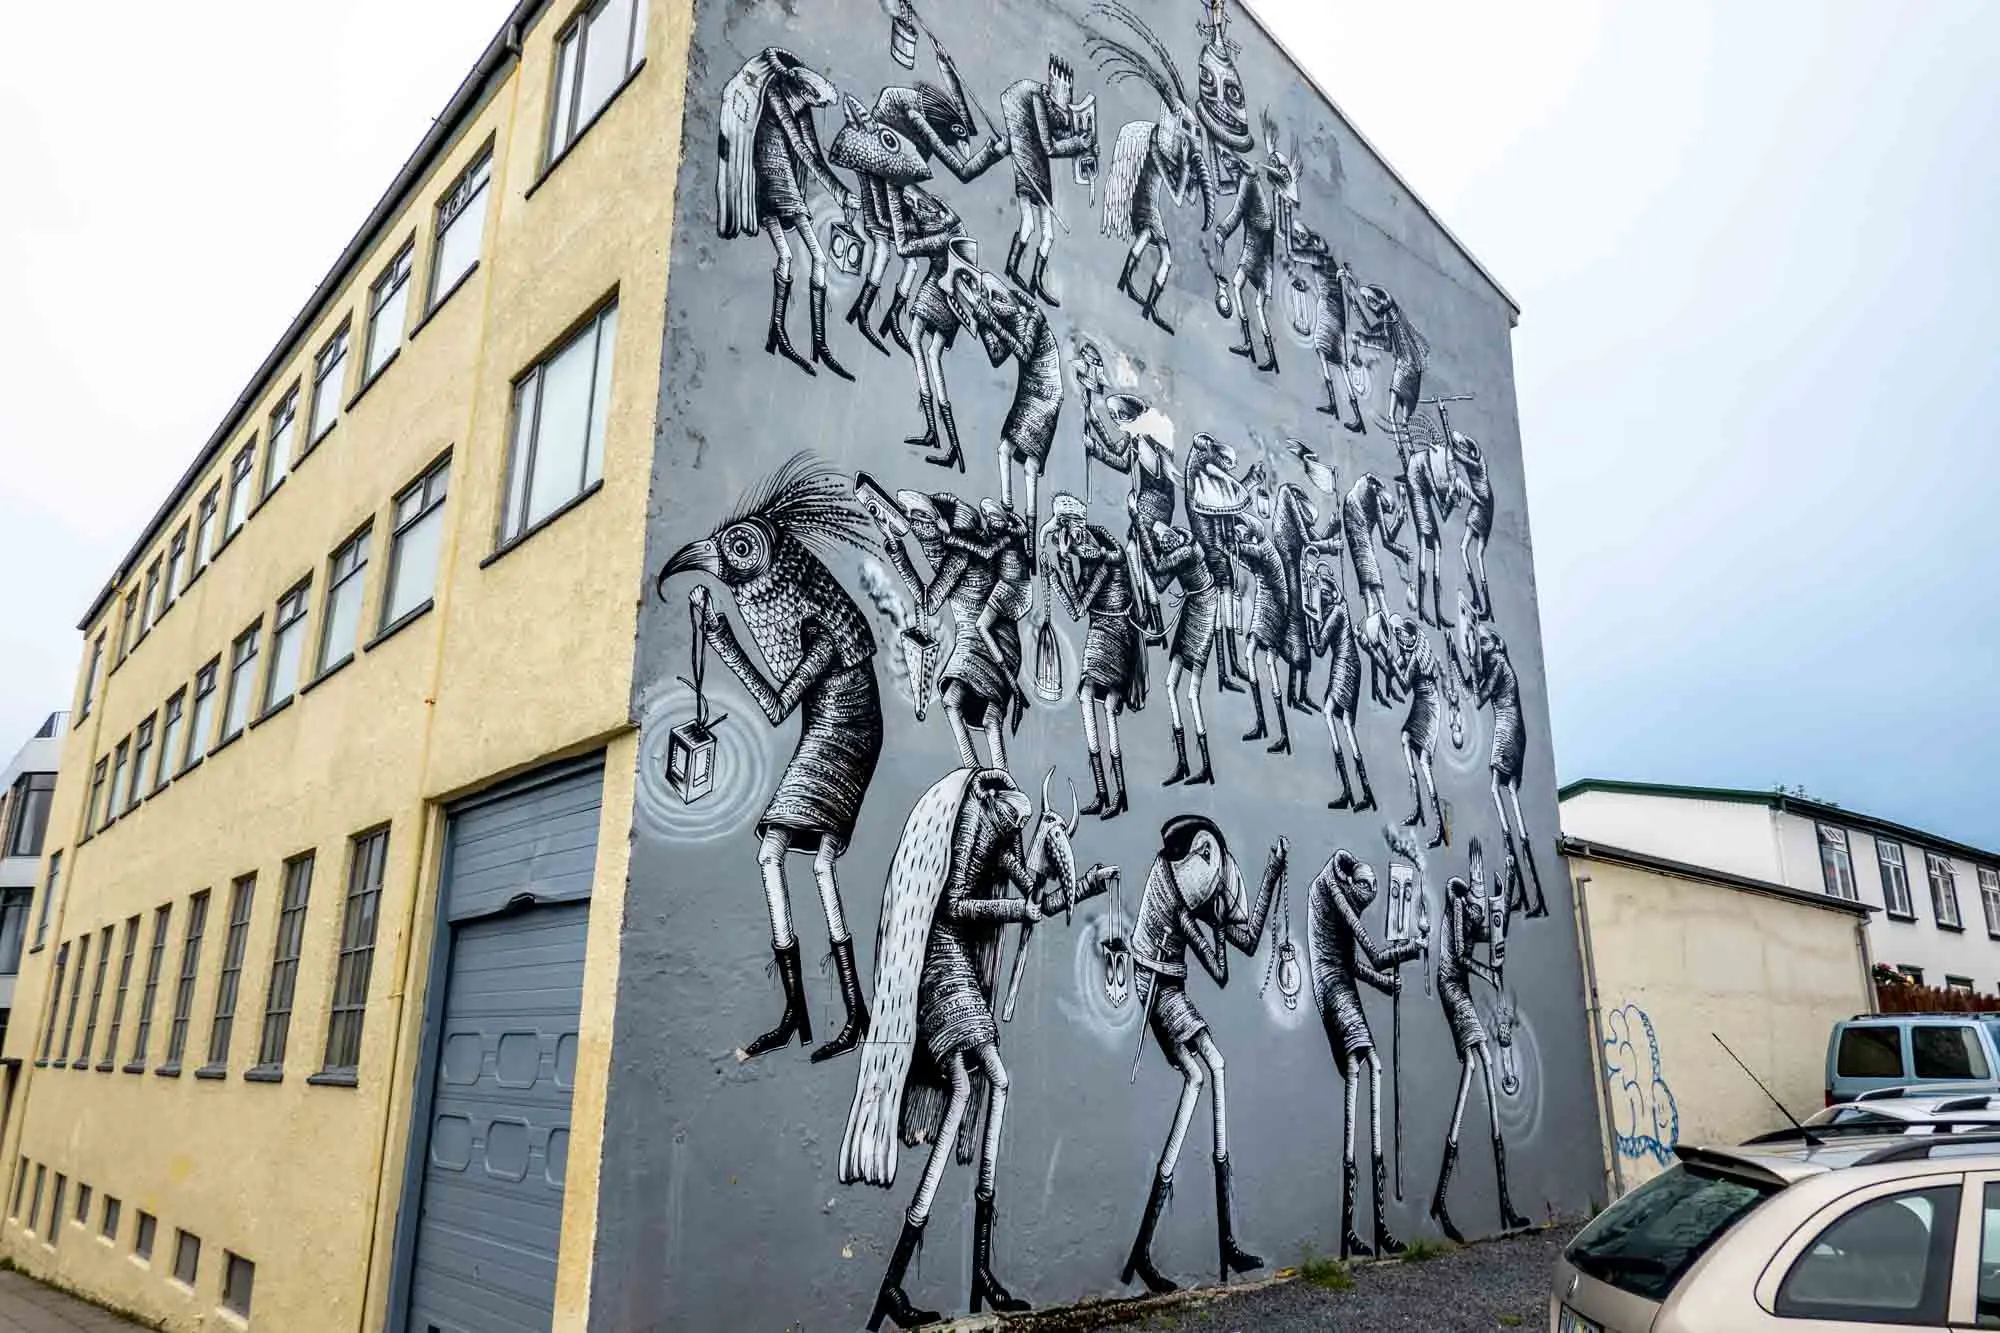 Mural on side of building with people in bird-head costumes